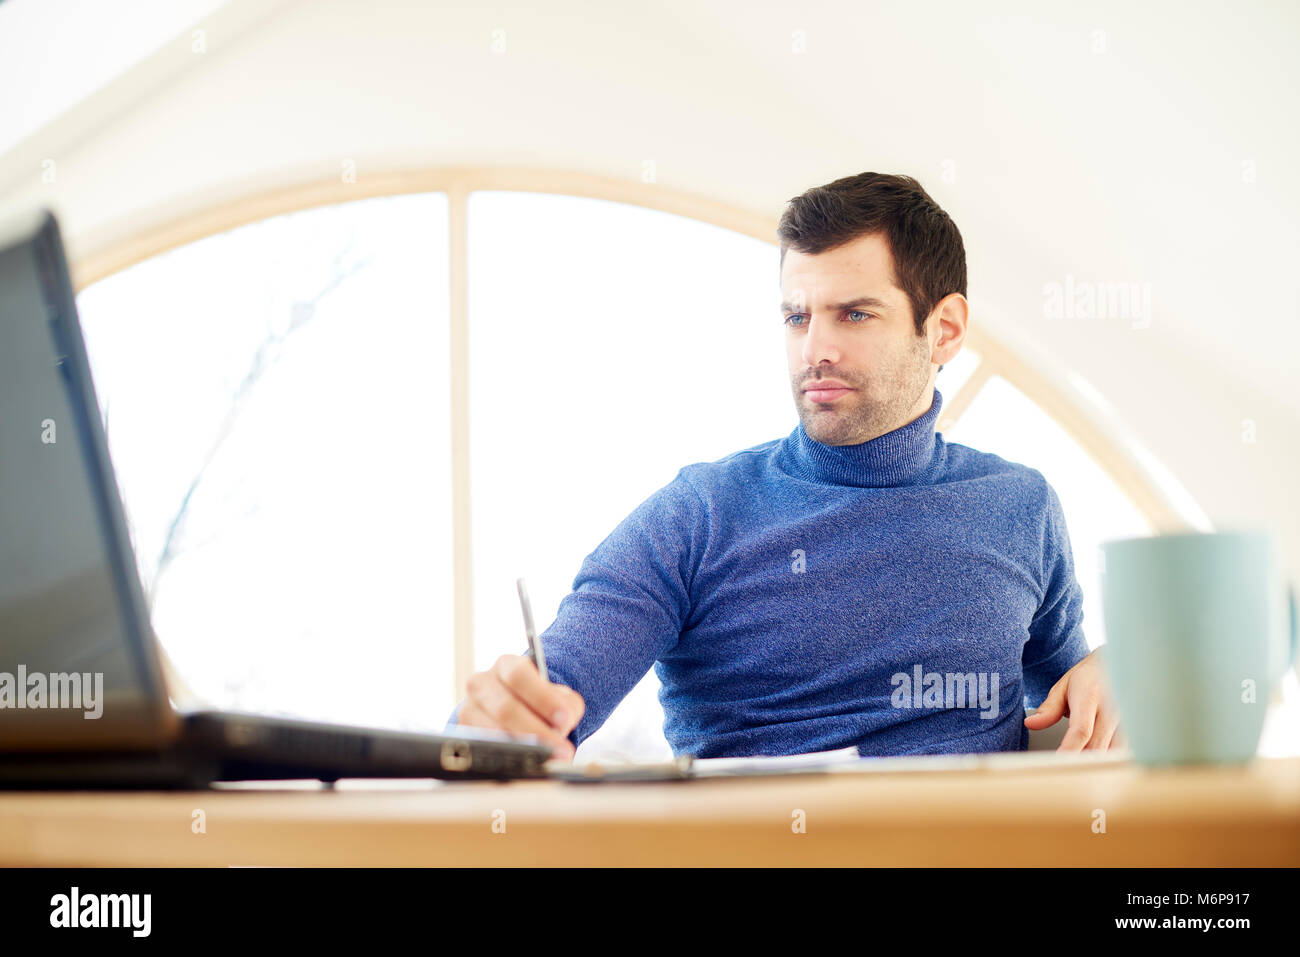 Portrait of casual young man wearing turtleneck sweater and looking thoughtul while working on laptop at home. Home office. Stock Photo